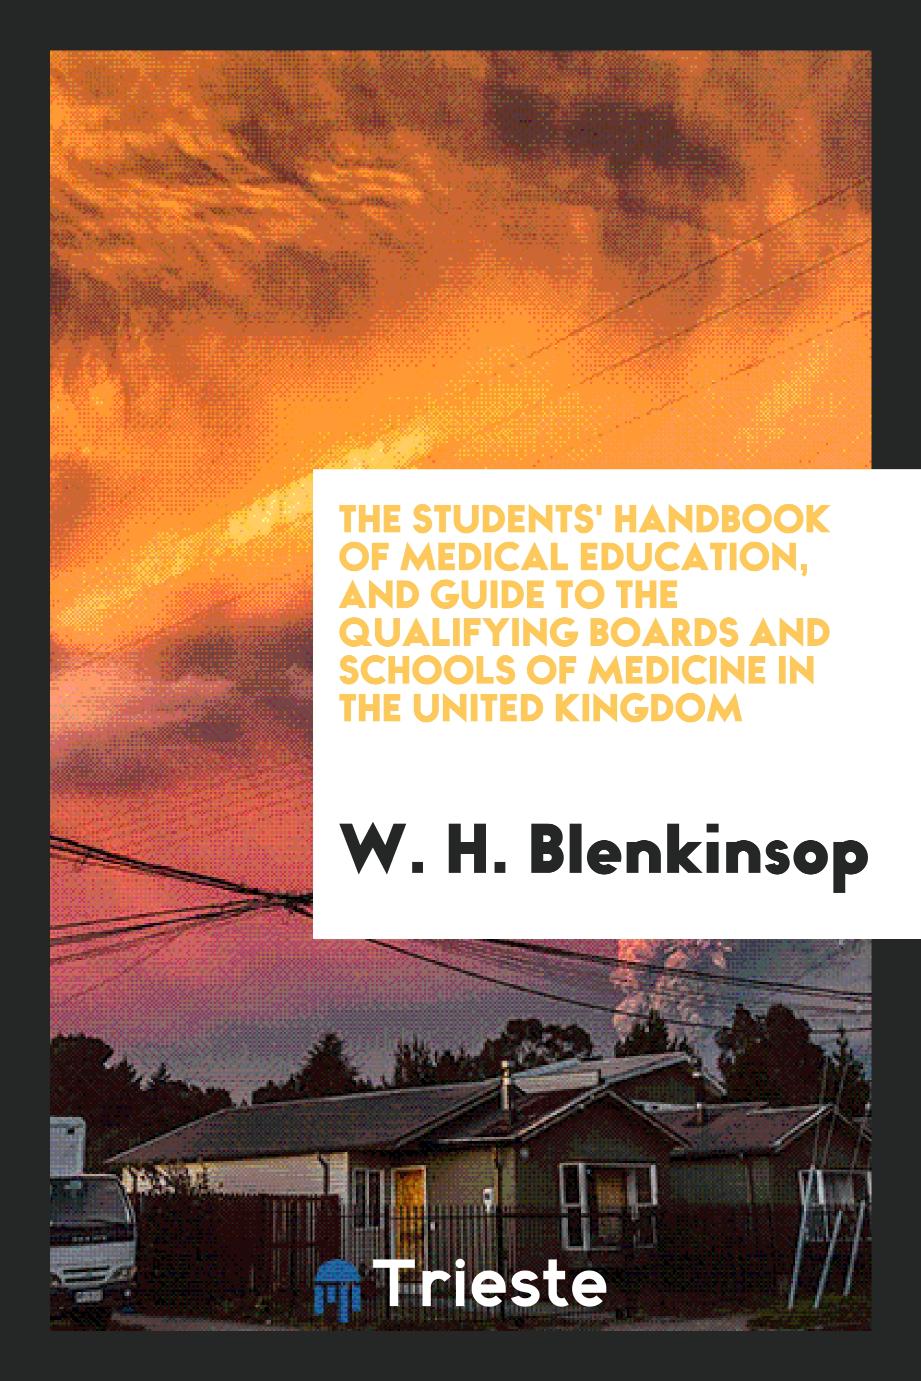 The Students' Handbook of Medical Education, and Guide to the Qualifying Boards and Schools of Medicine in the United Kingdom